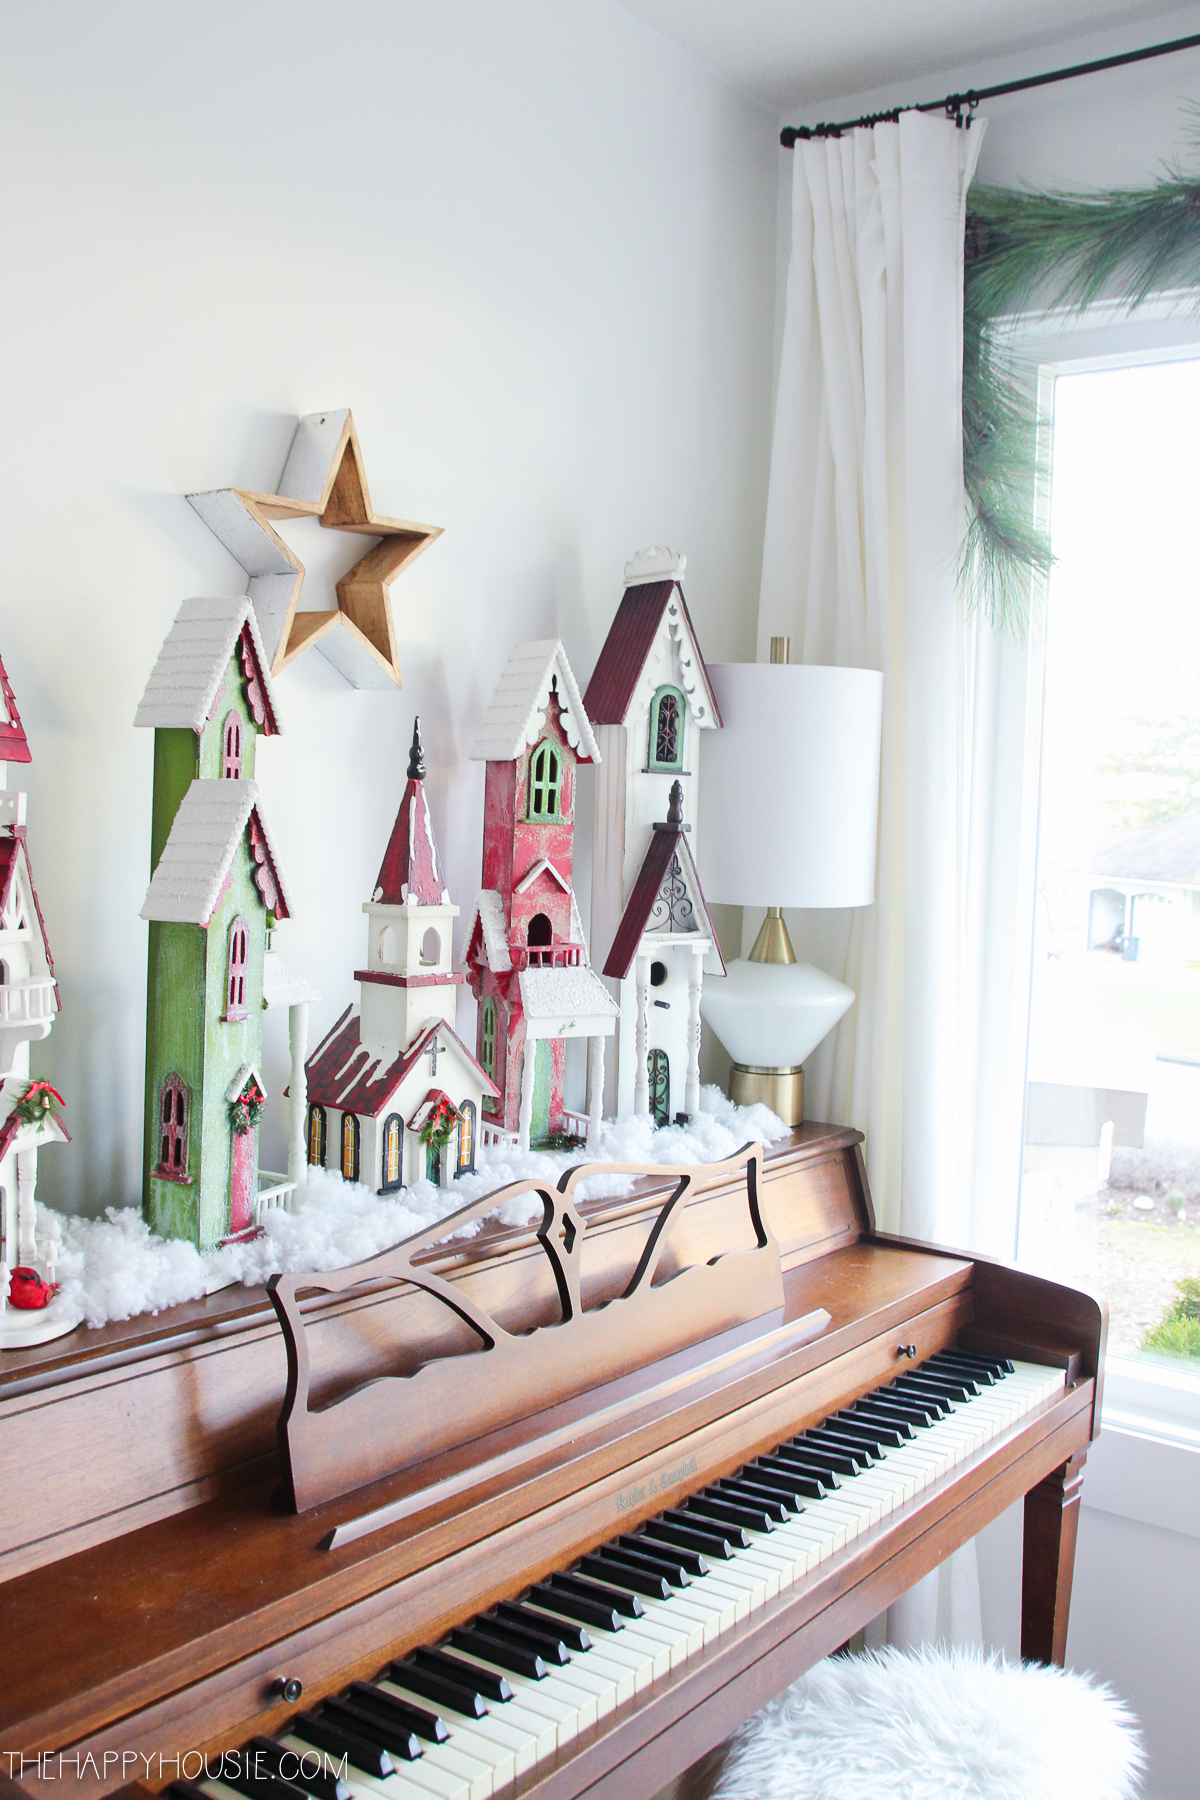 A piano with Christmas houses on it.